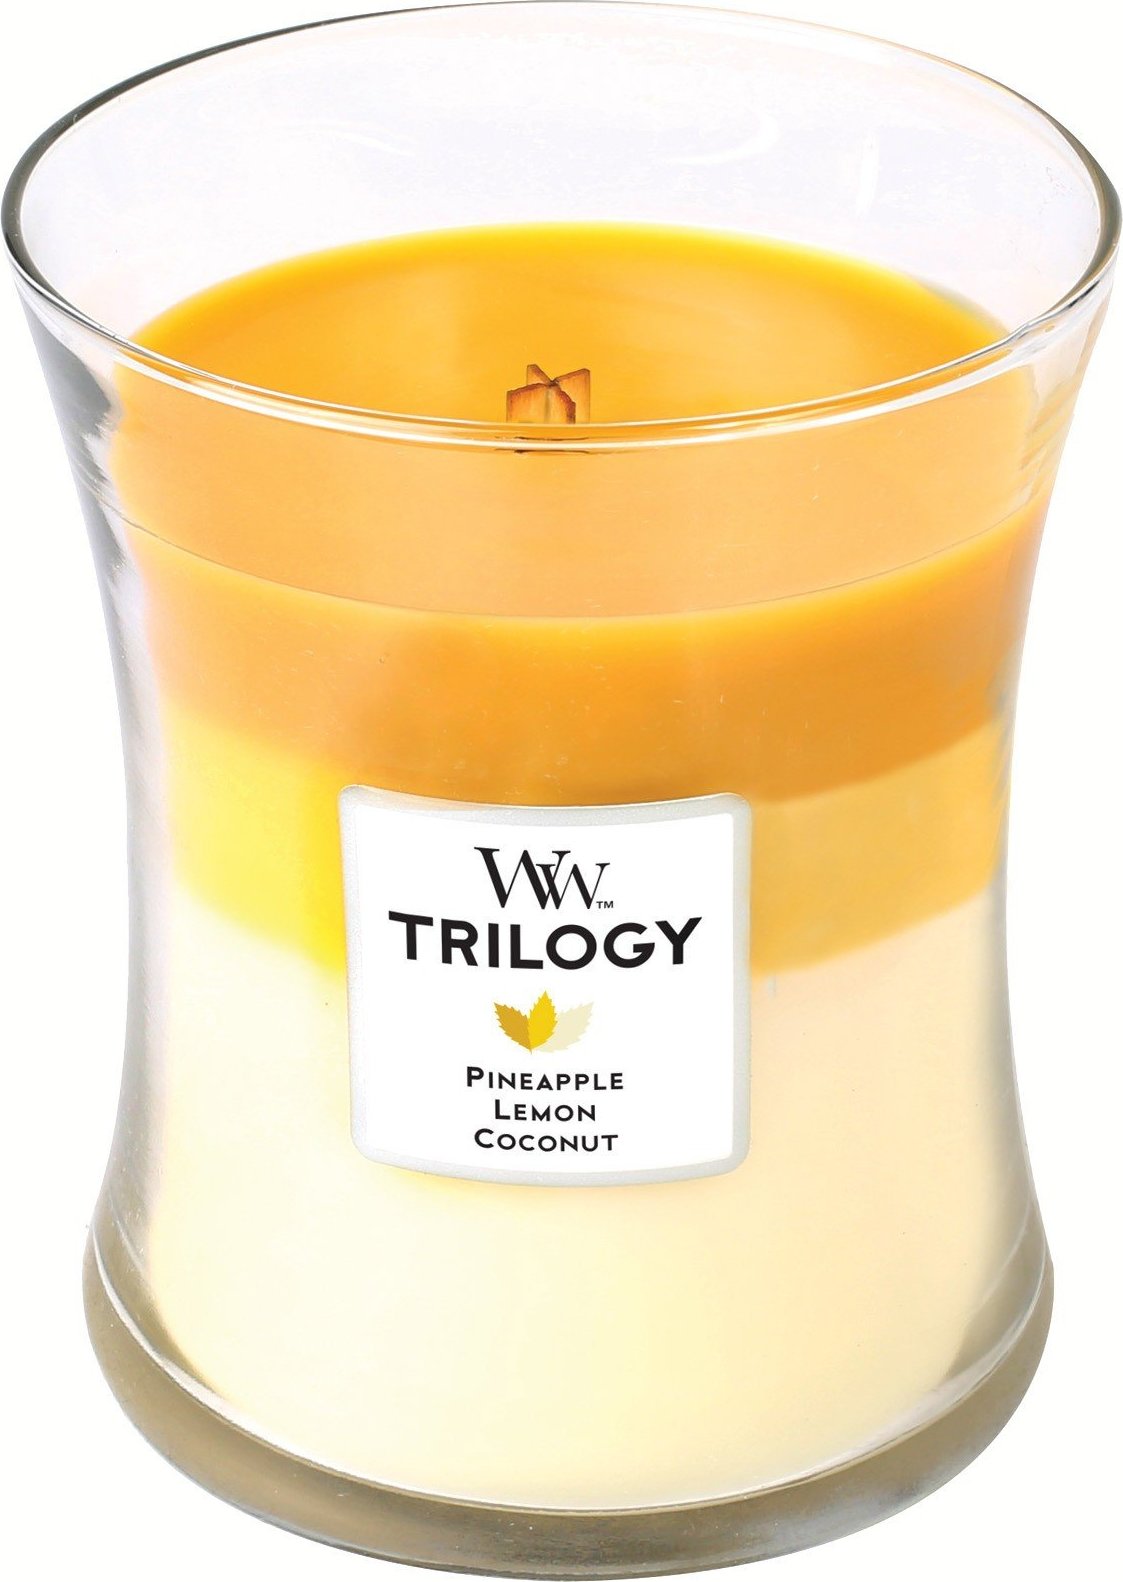 WoodWick Candles - Summer Fridays every day! At The Beach candle combines  notes of tropical citrus, creamy coconuts and cool sea breezes.